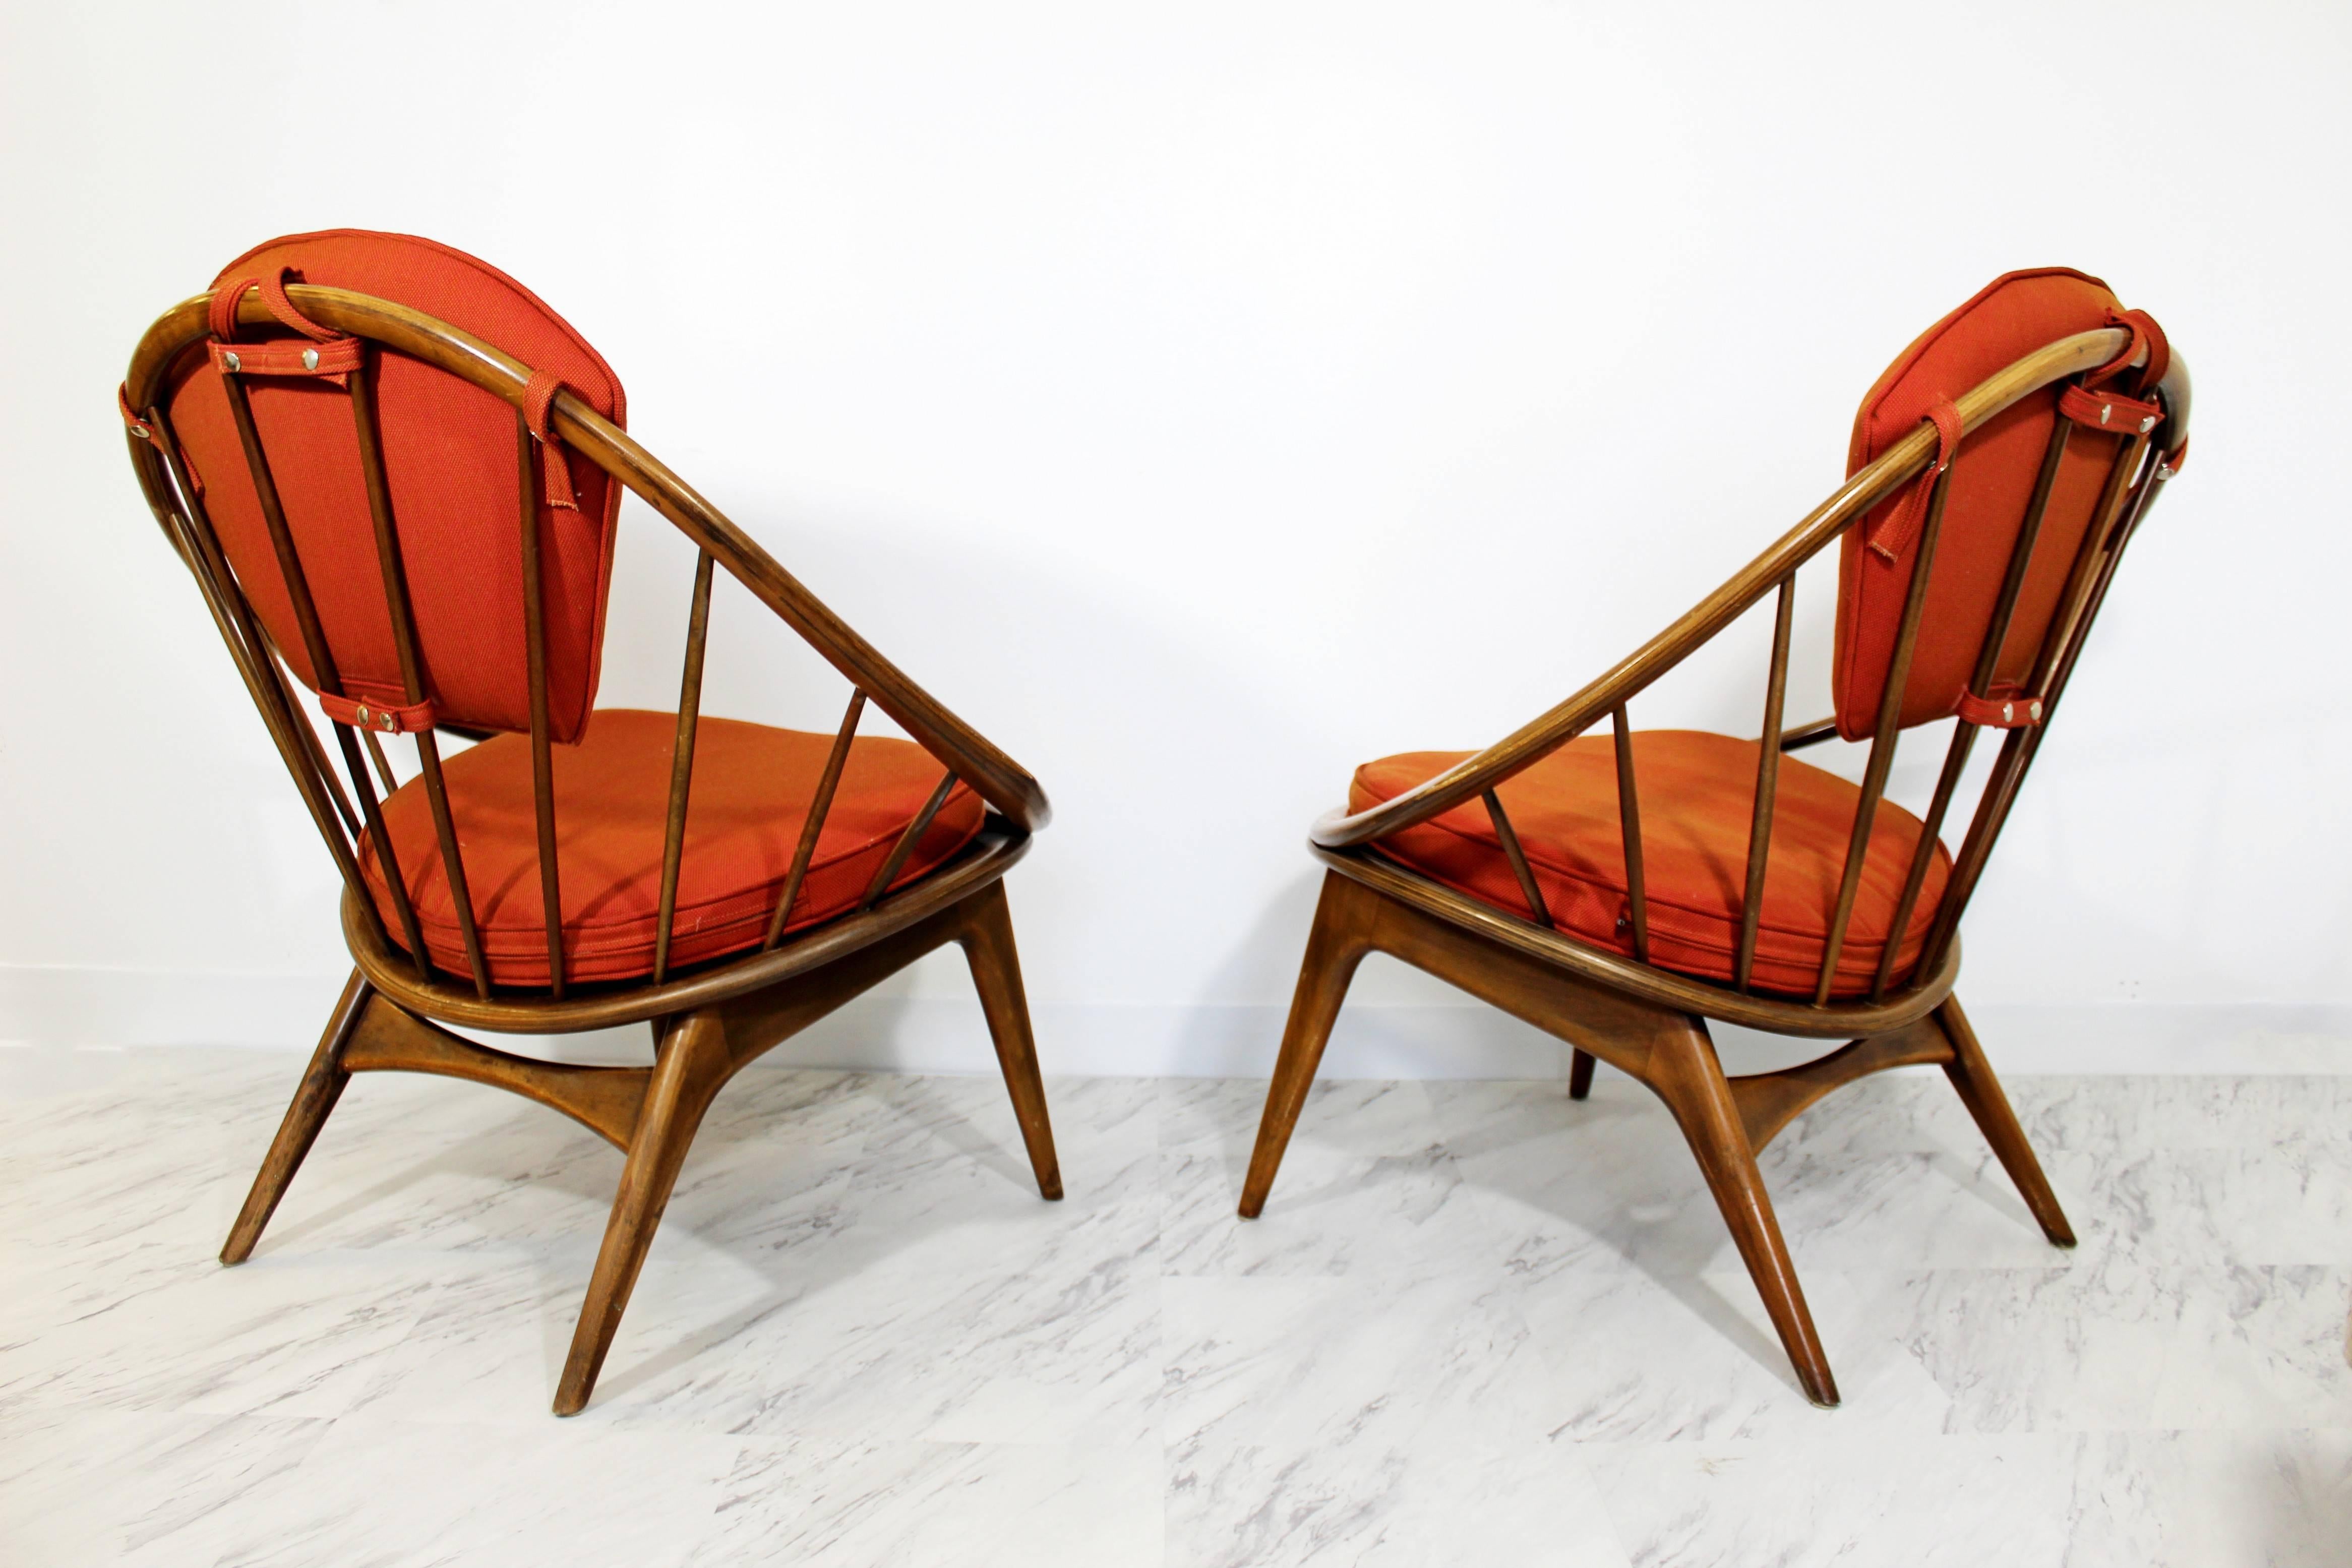 Mid-20th Century Pair of Signed Hoop Chairs by Ib Kofod-Larsen